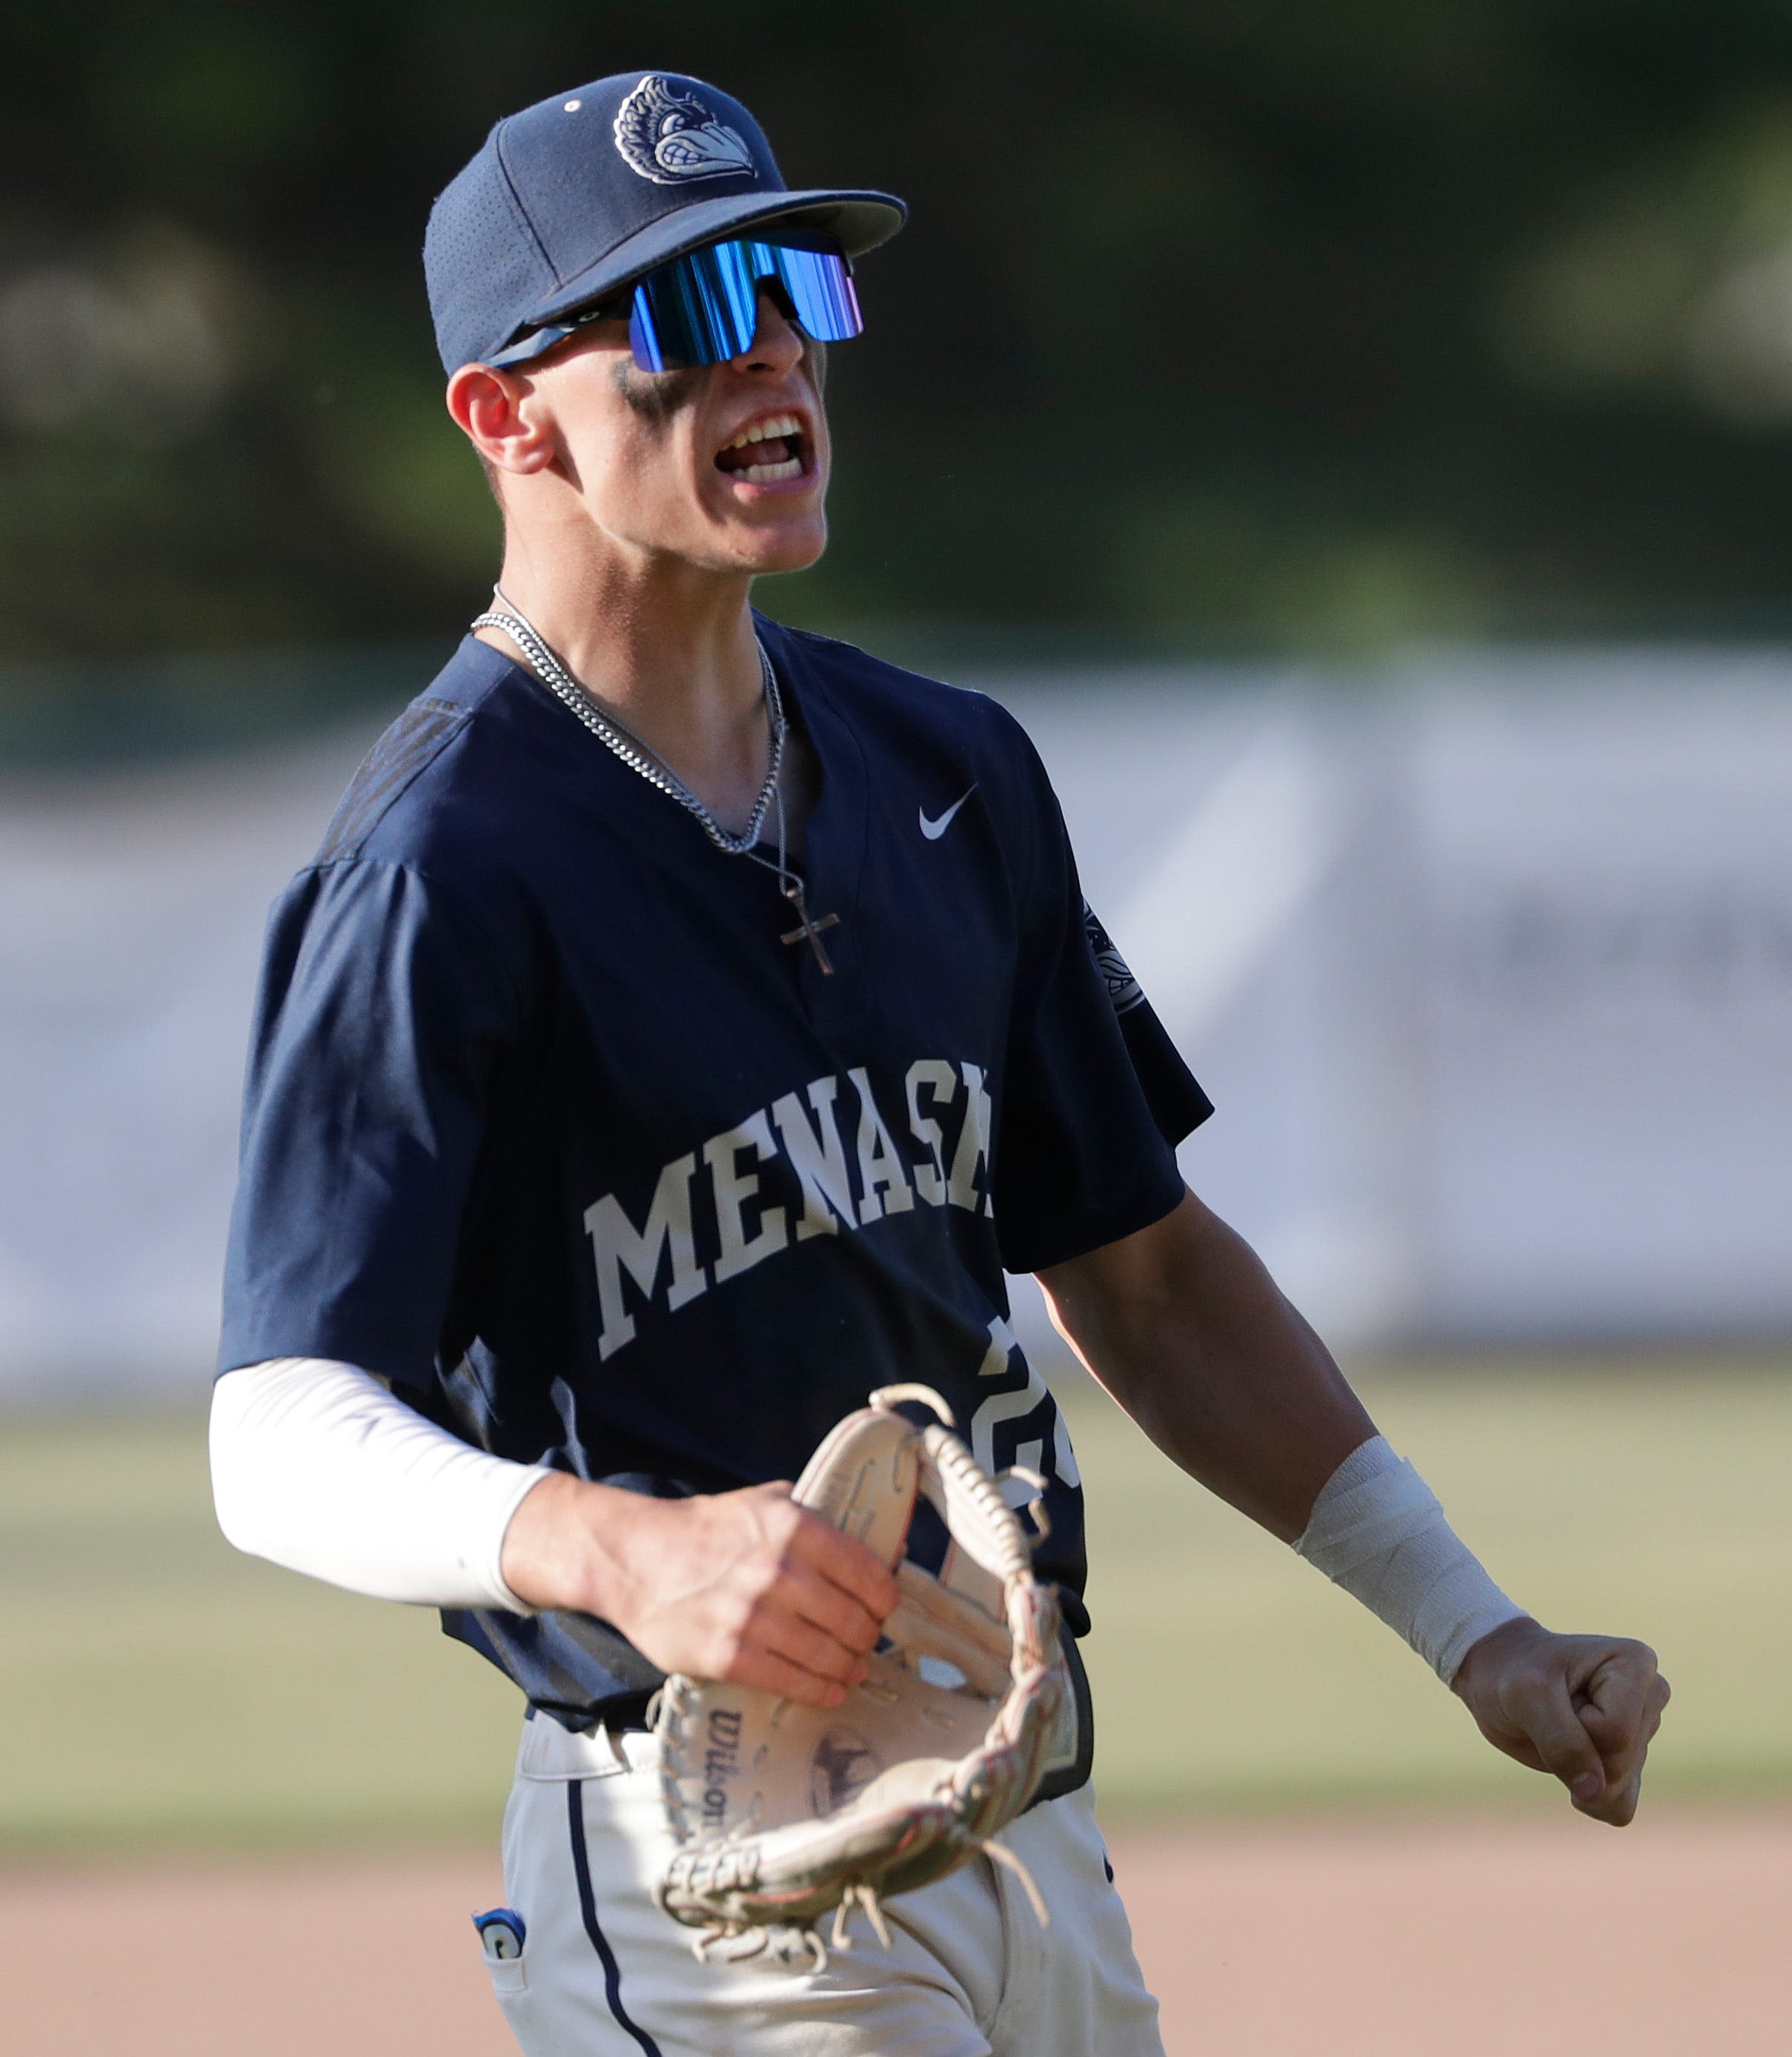 Menasha Bluejays baseball team has been riding strong pitching and defense to first place in the Bay Conference